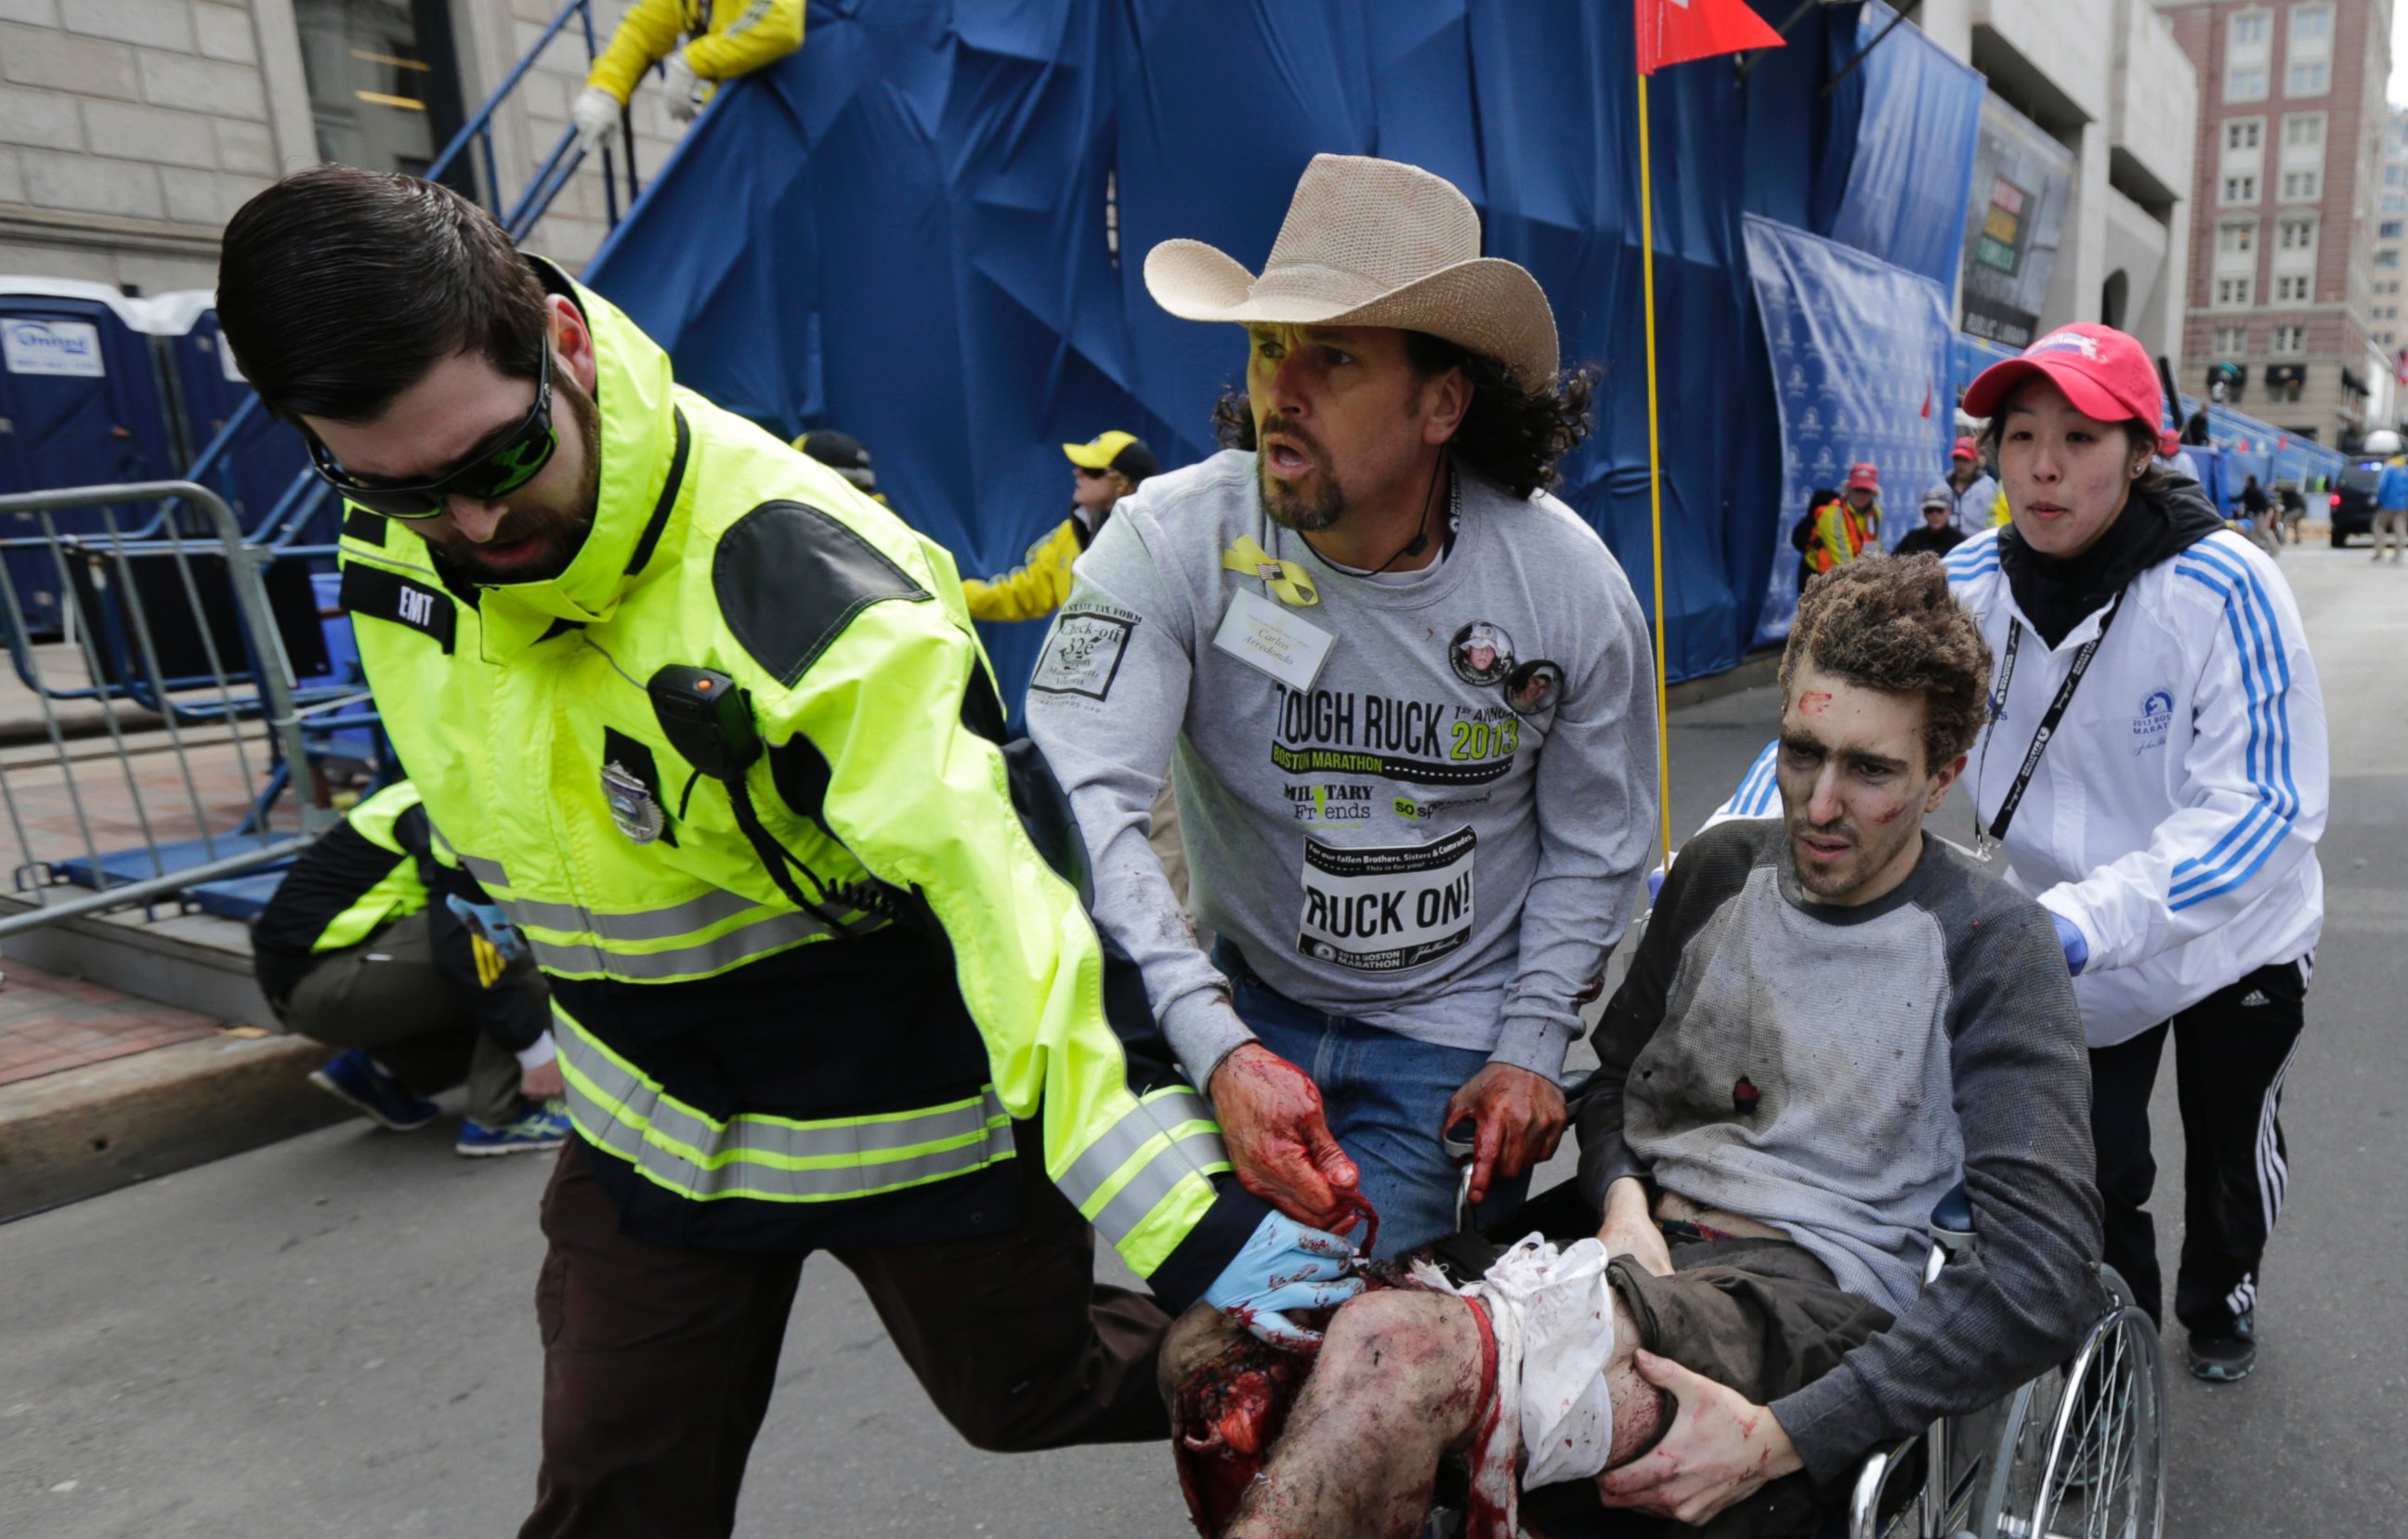 PHOTO: An emergency responder and volunteers, including Carlos Arredondo in the cowboy hat, push Jeff Bauman in a wheel chair after he was injured in an explosion near the finish line of the Boston Marathon Monday, April 15, 2013 in Boston.